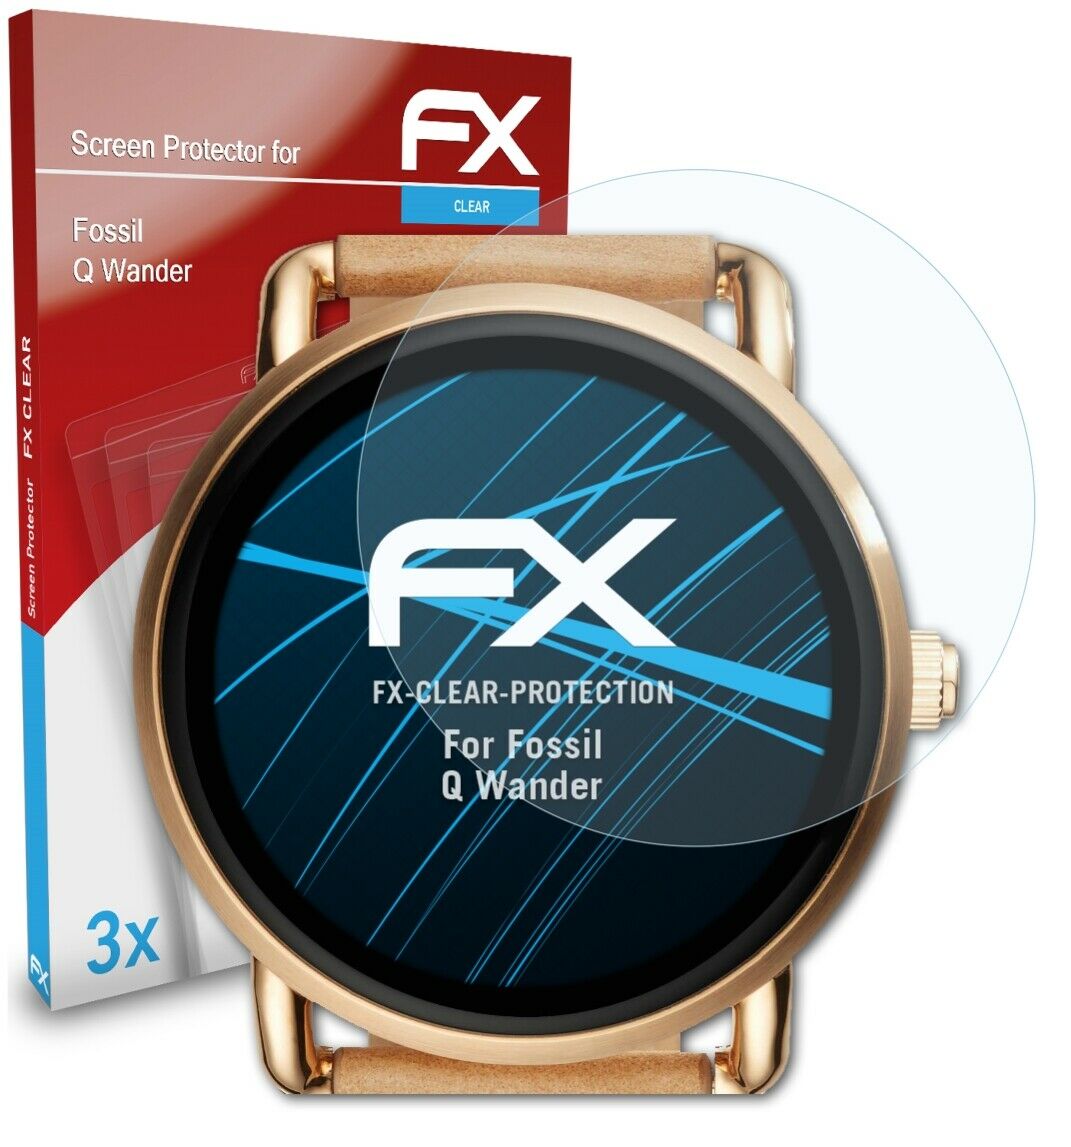 atFoliX 3x Screen Protection Film for Fossil Q Wander Screen Protector clear